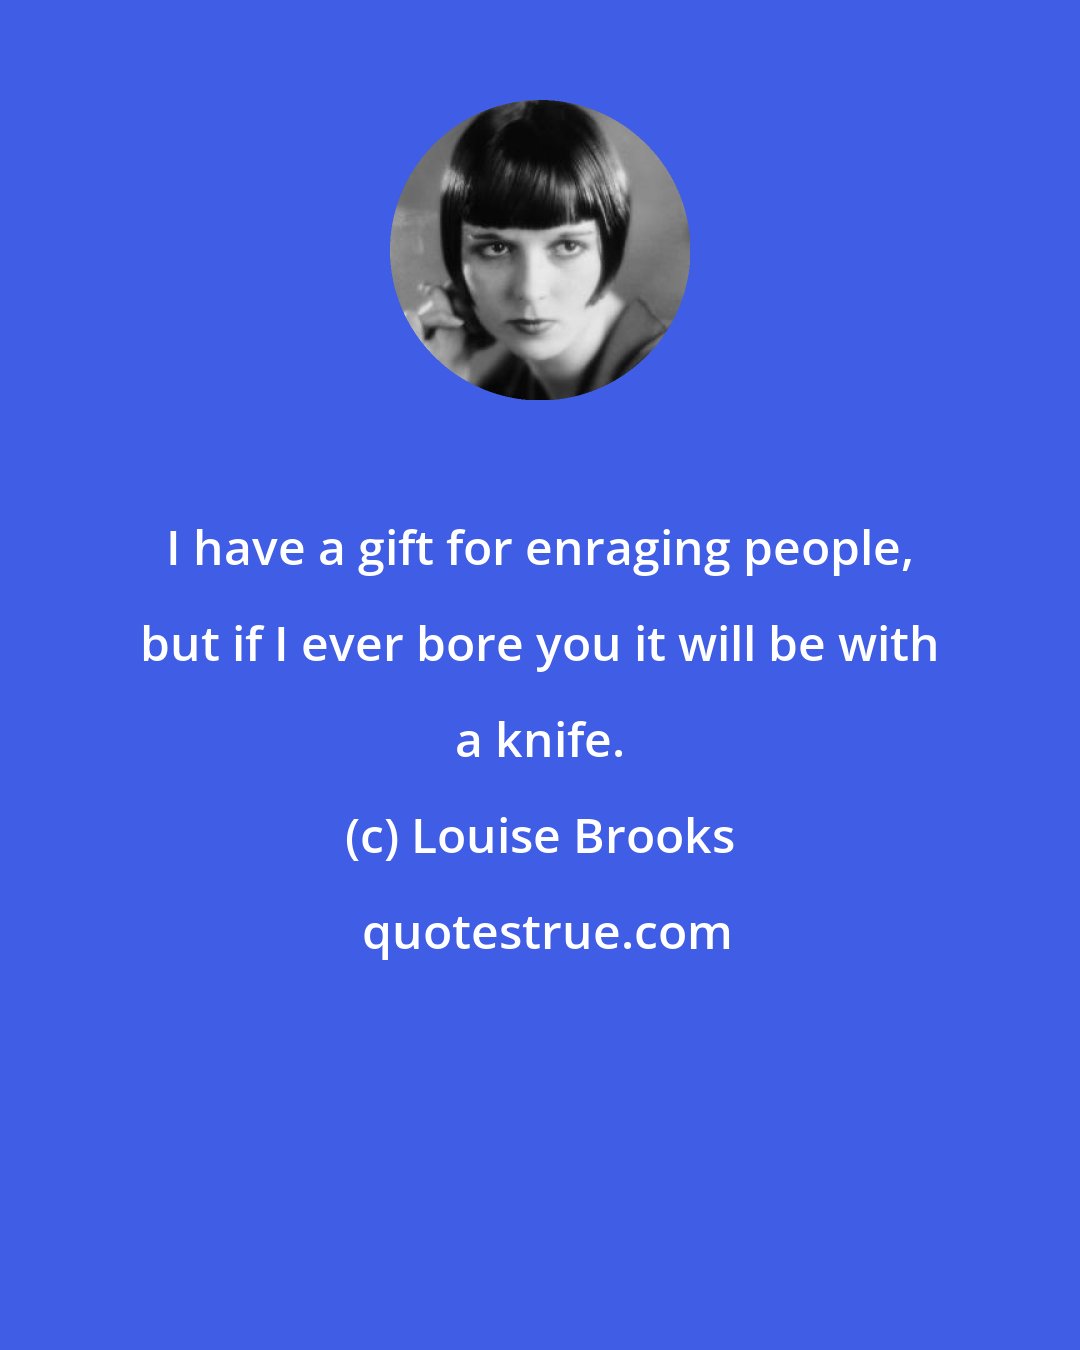 Louise Brooks: I have a gift for enraging people, but if I ever bore you it will be with a knife.